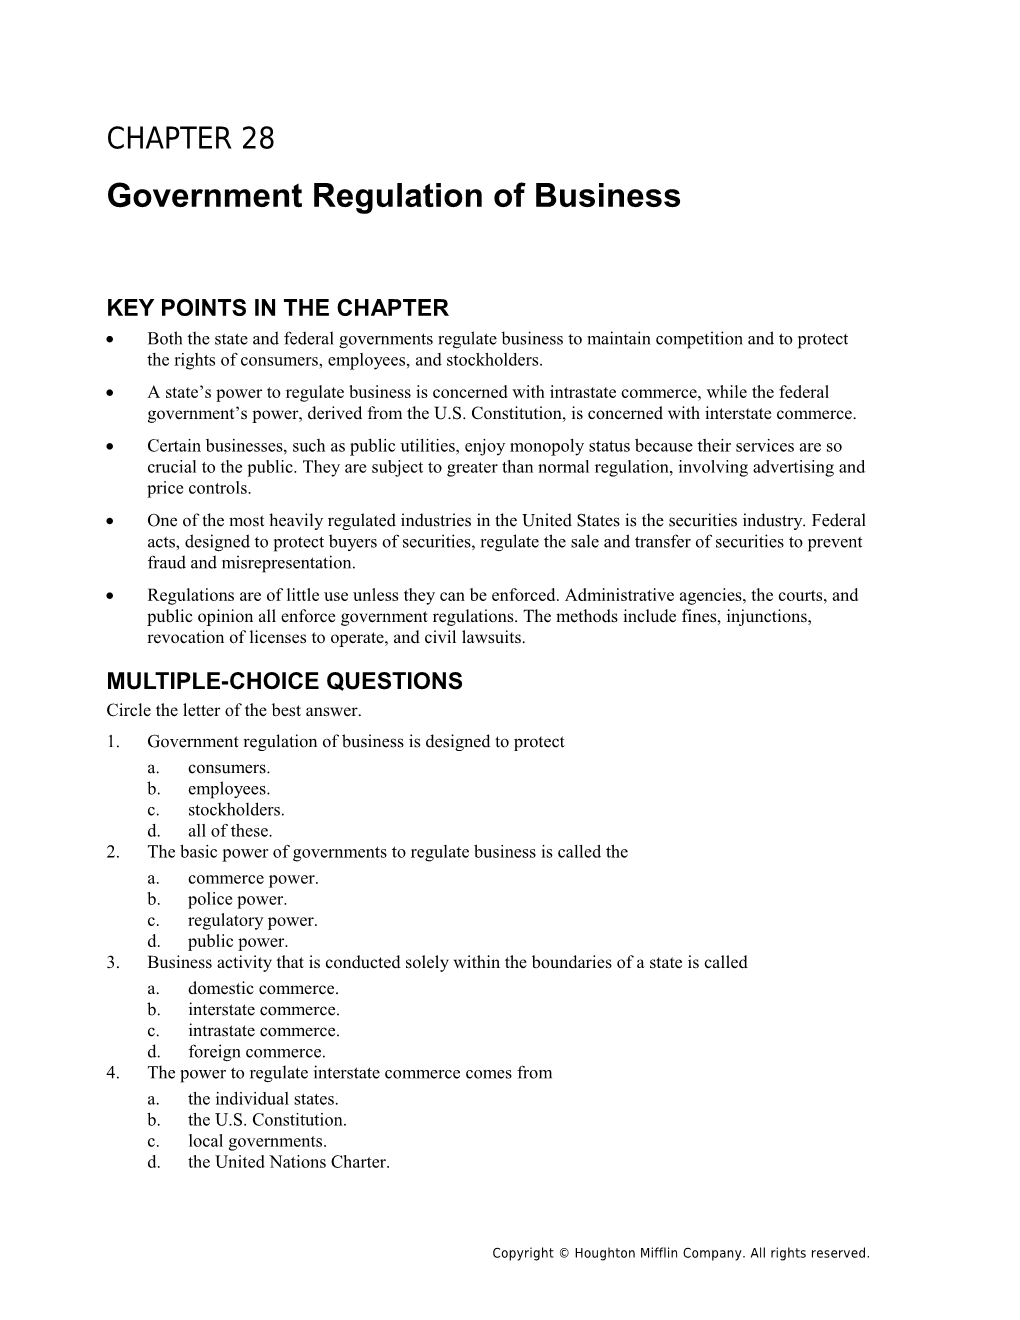 Chapter 28: Government Regulation of Business 175